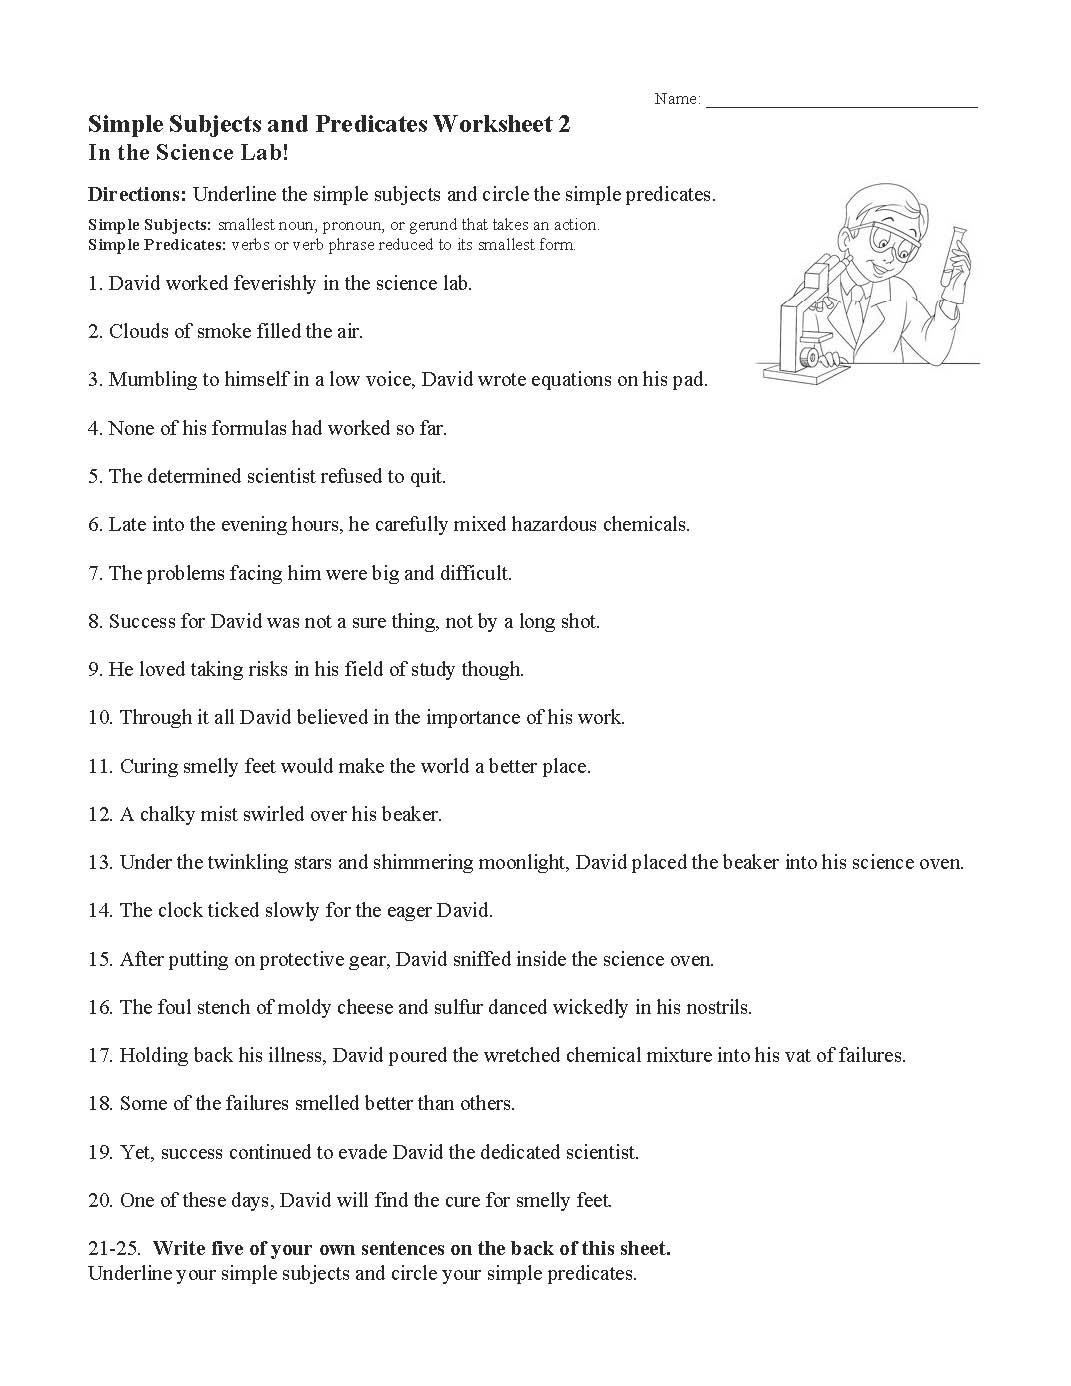 simple-subjects-and-predicates-worksheet-2-preview